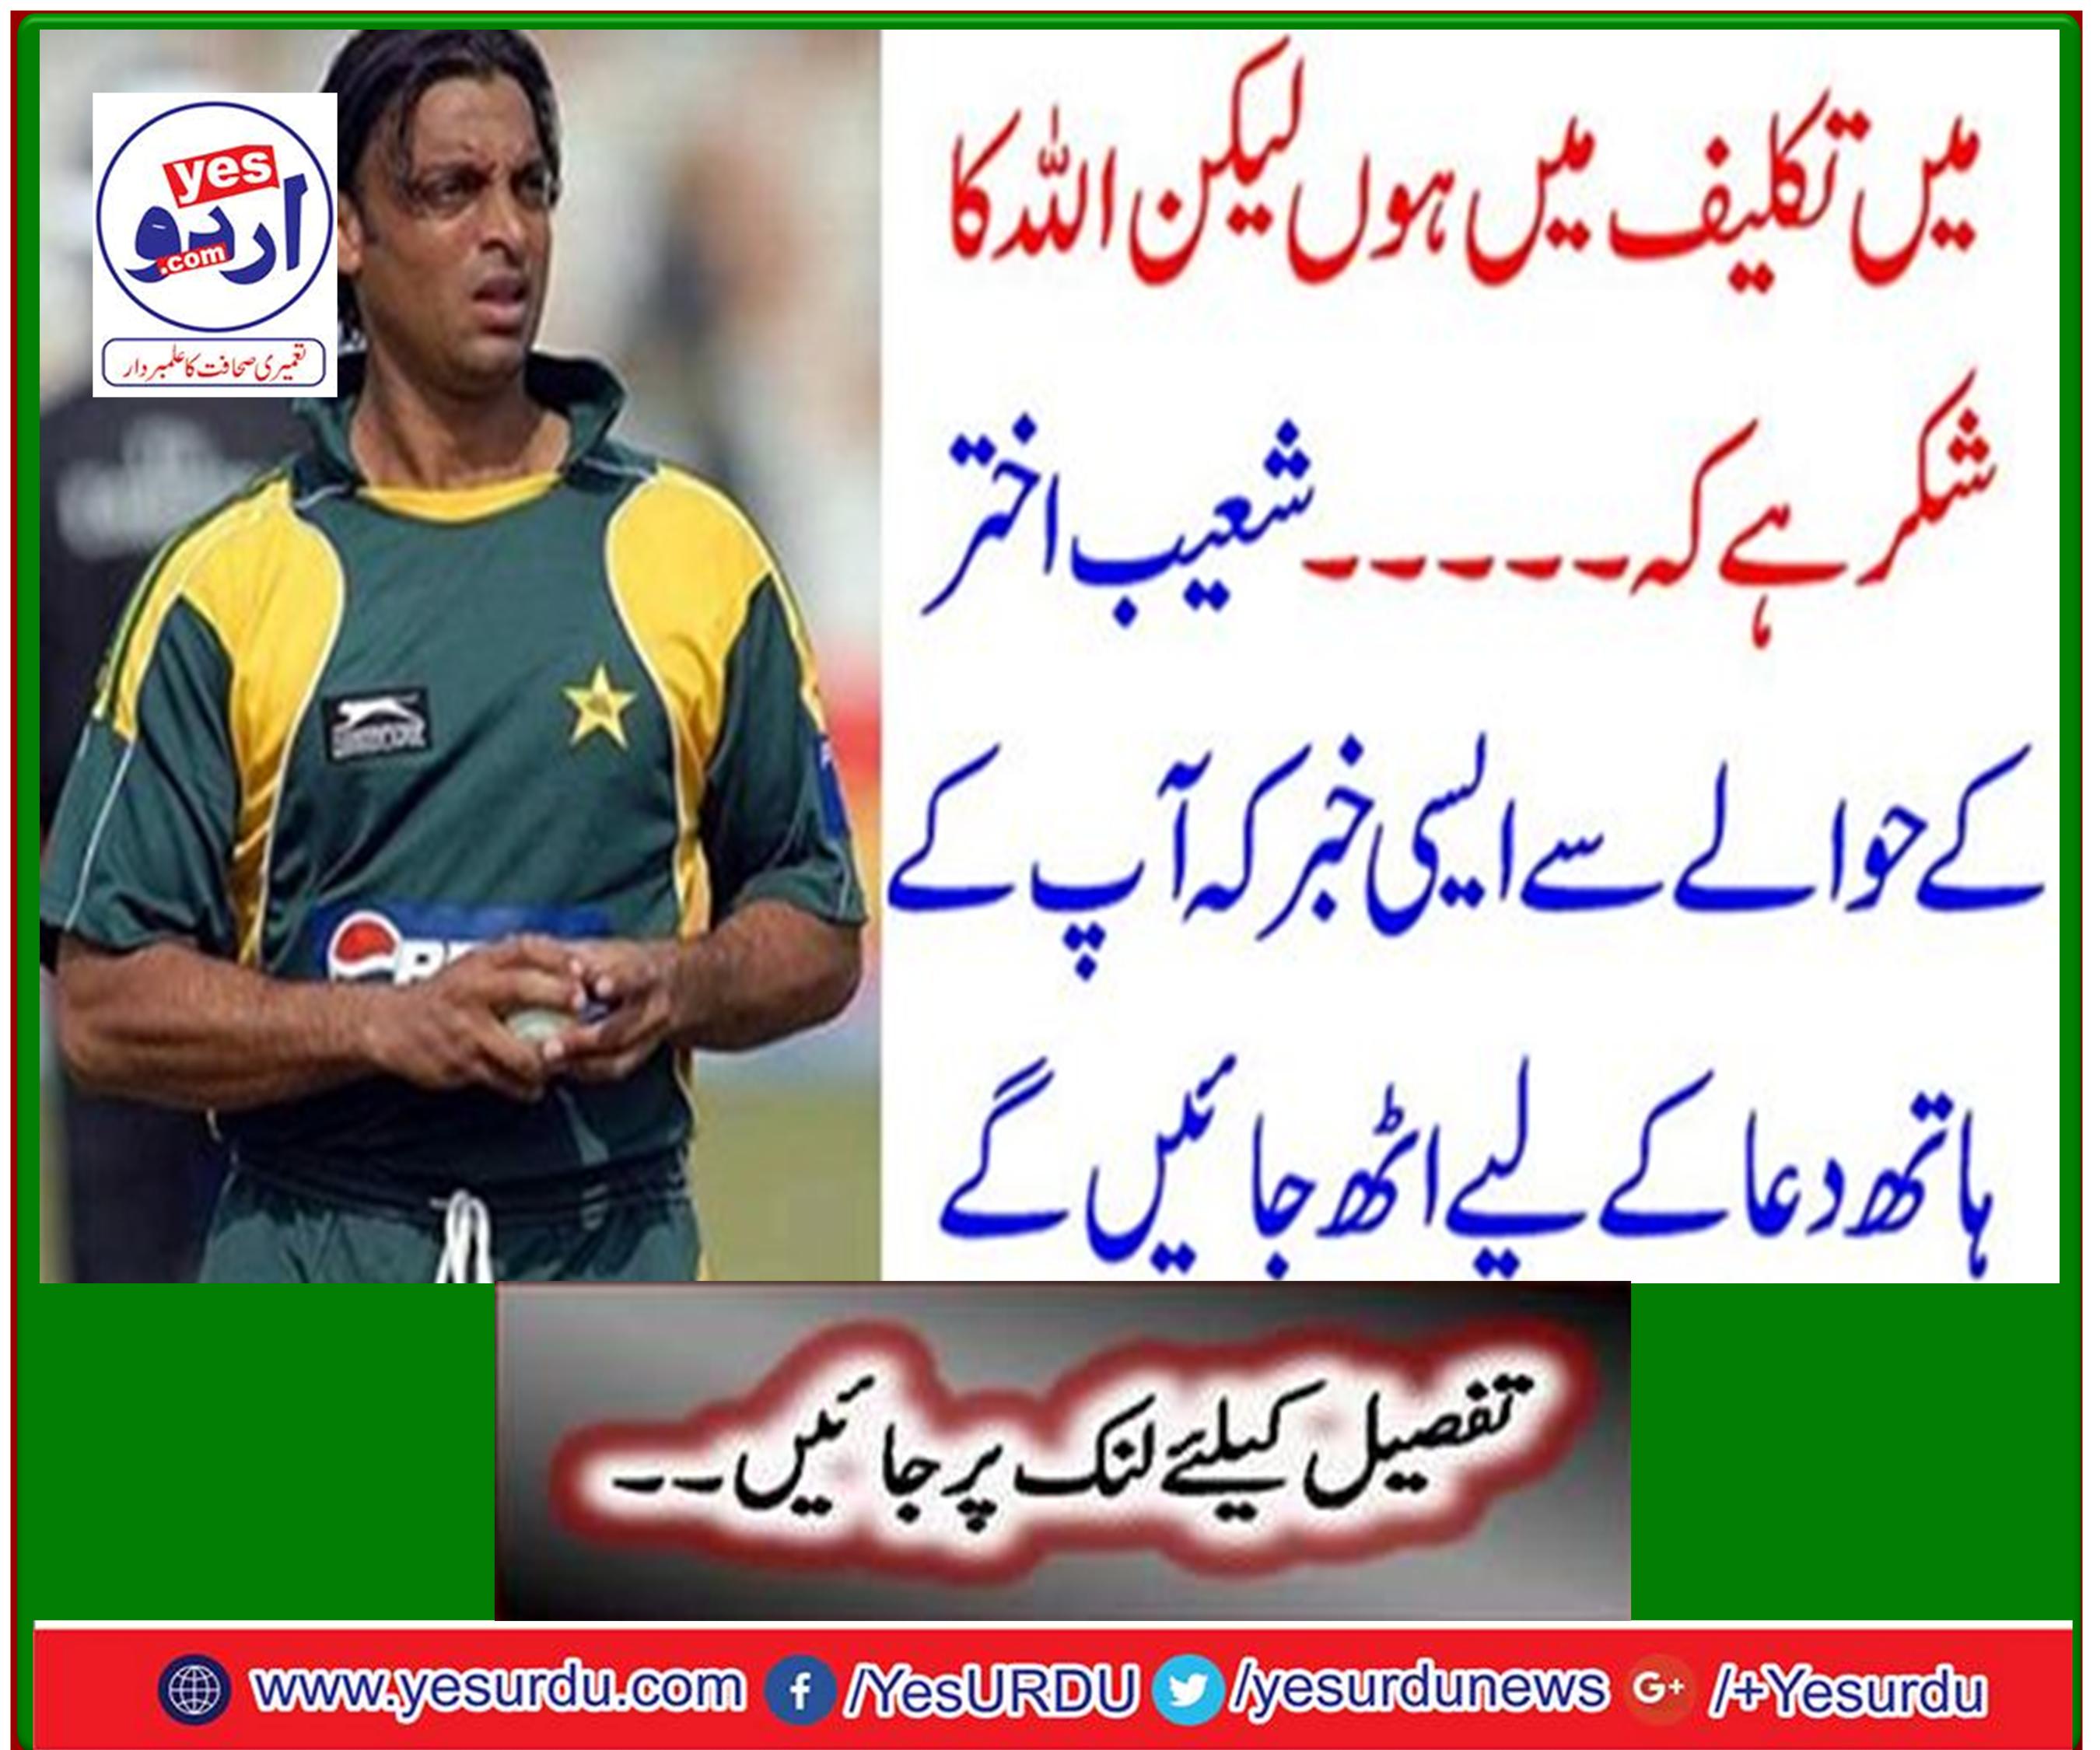 I am in distress but thank God that… ”News about Shoaib Akhtar that your hands will rise to pray.